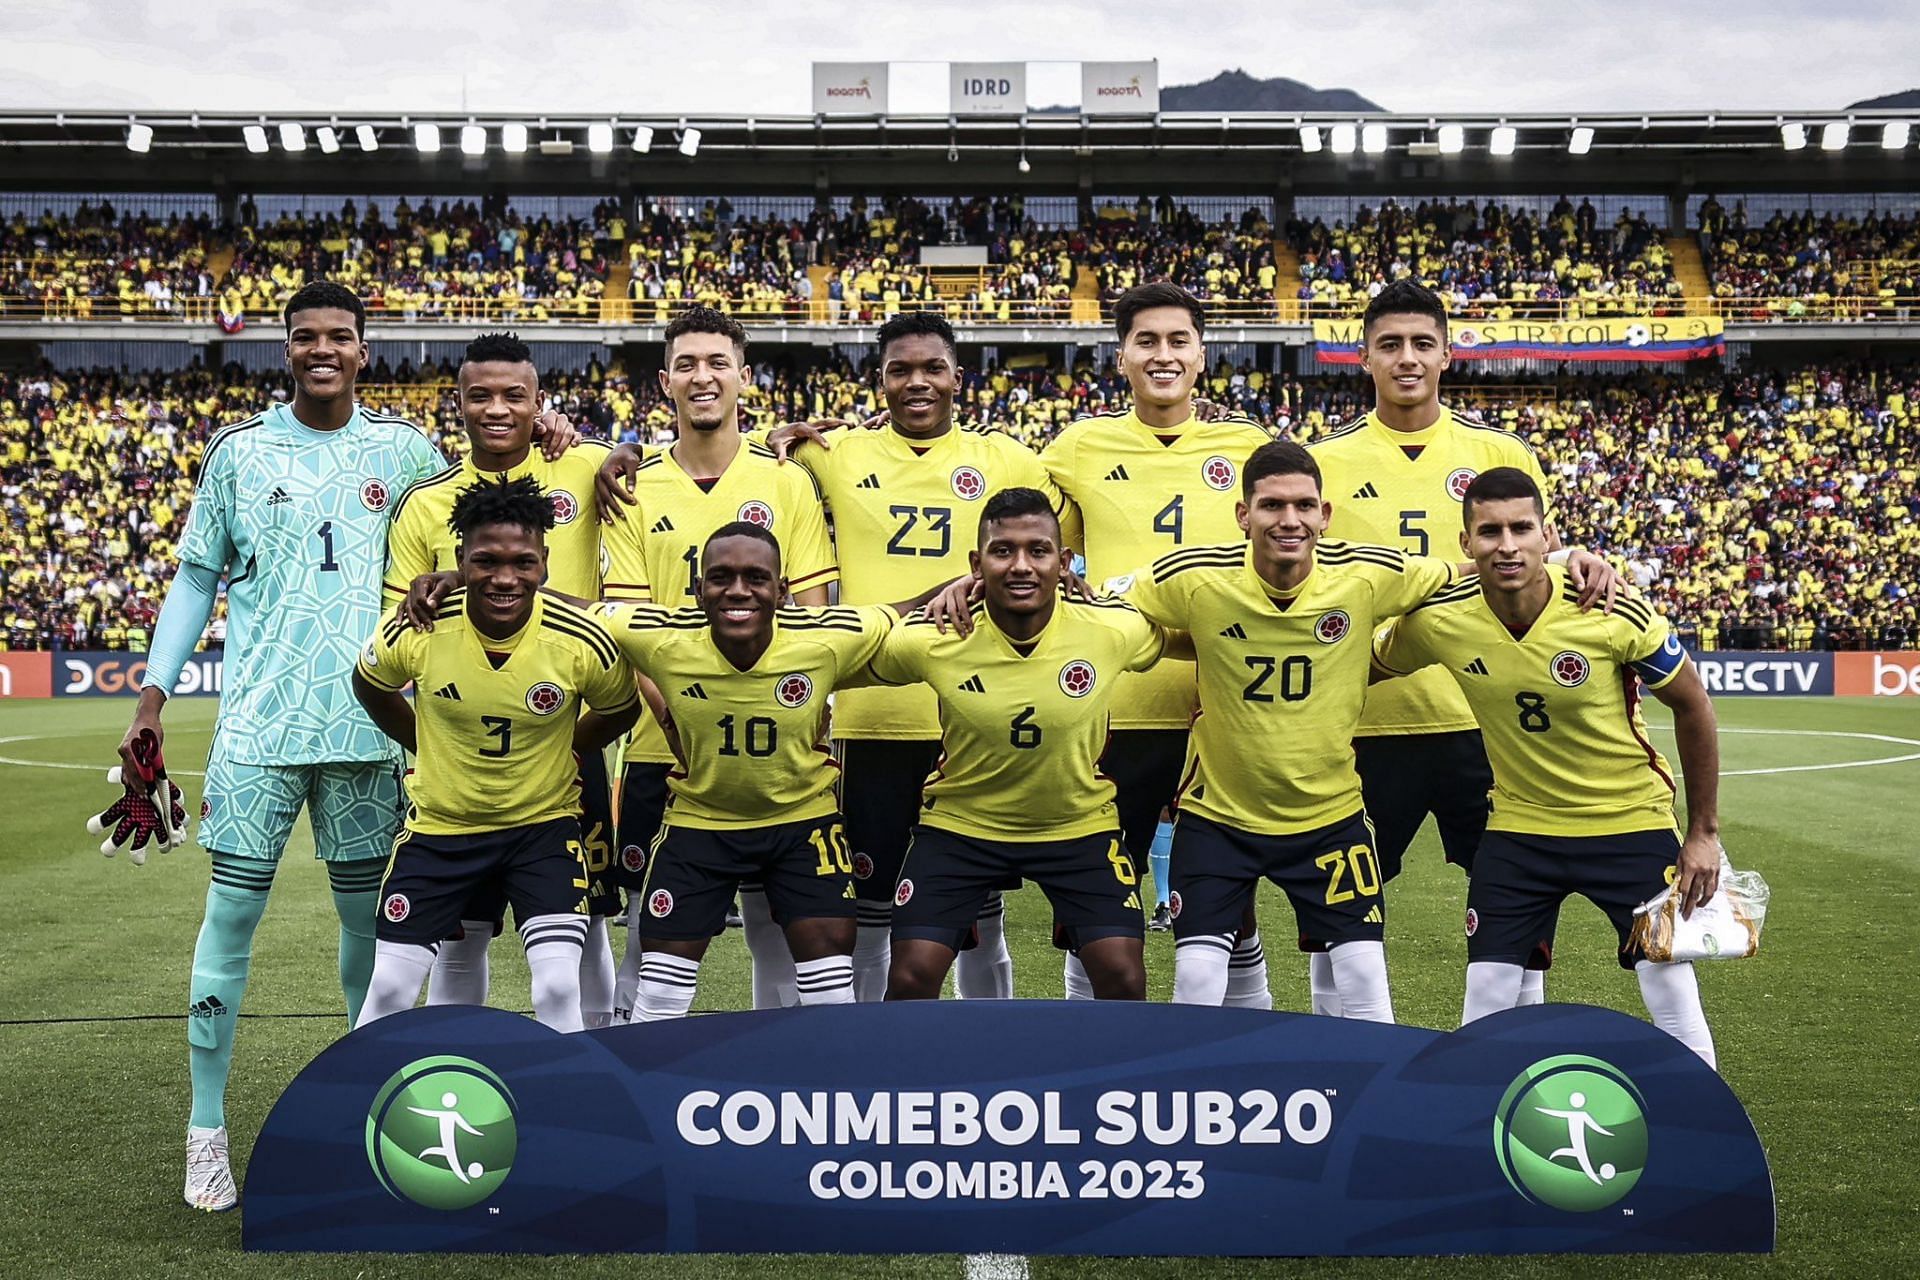 Colombia will face Israel on Sunday 